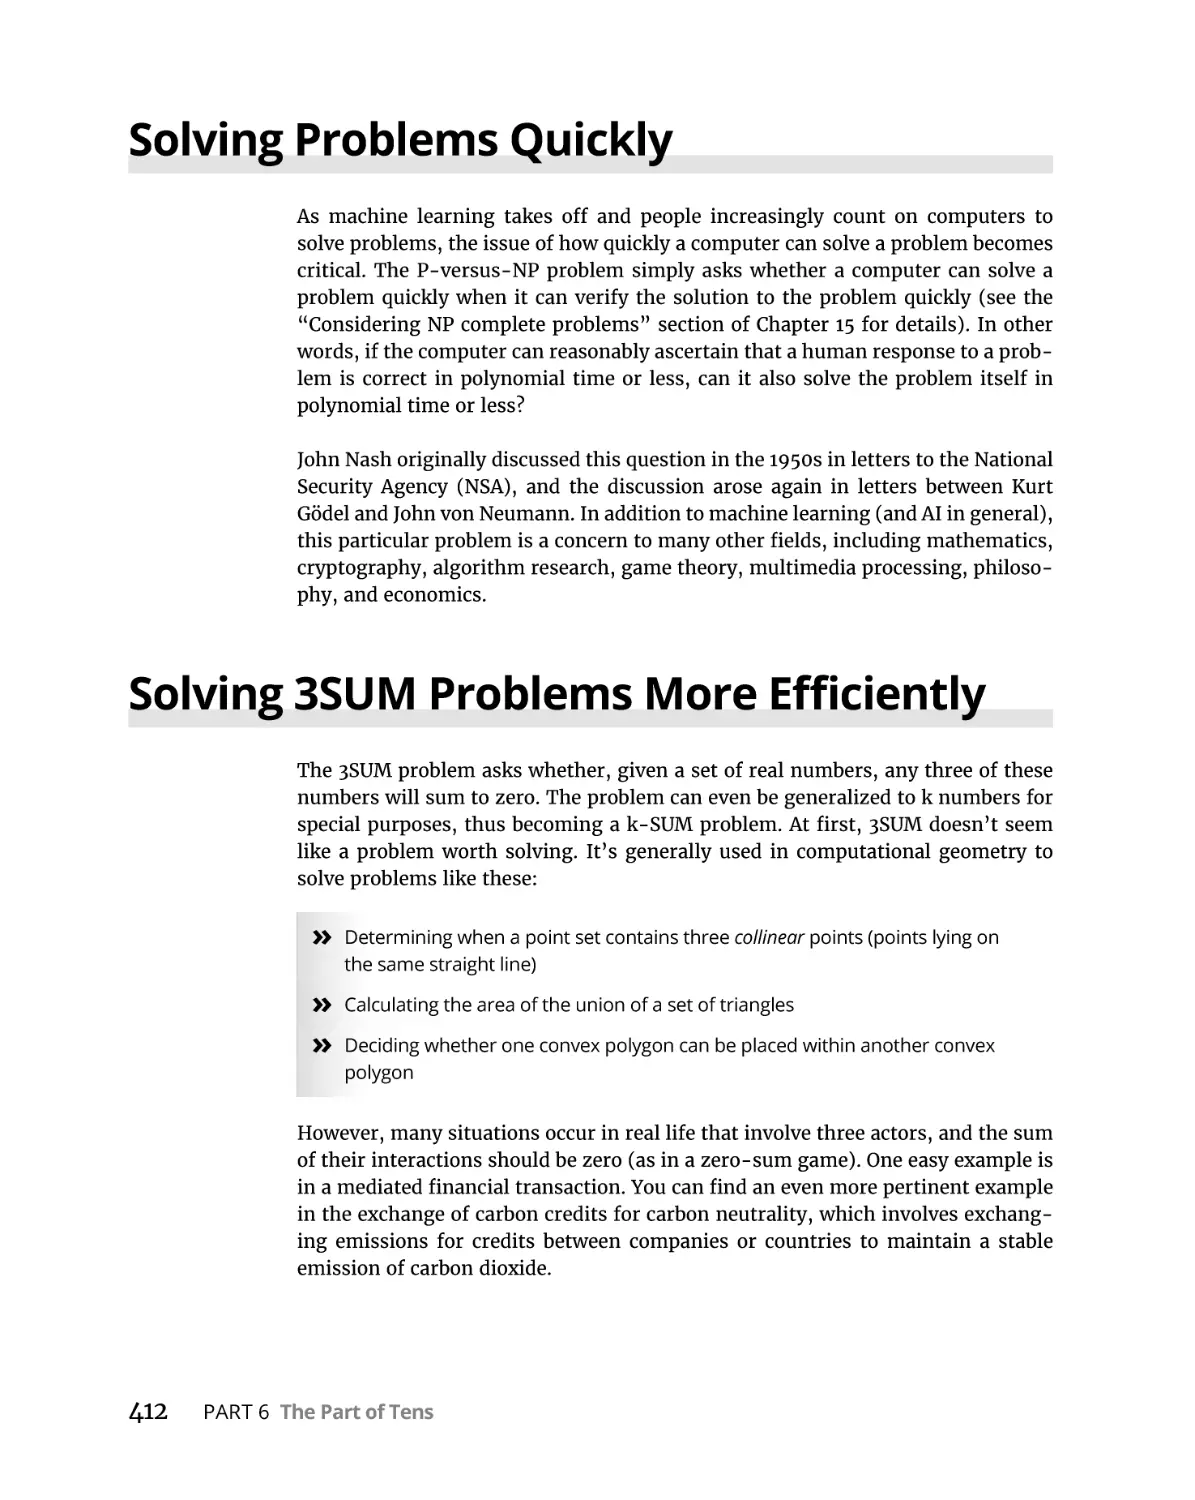 Solving Problems Quickly
Solving 3SUM Problems More Efficiently